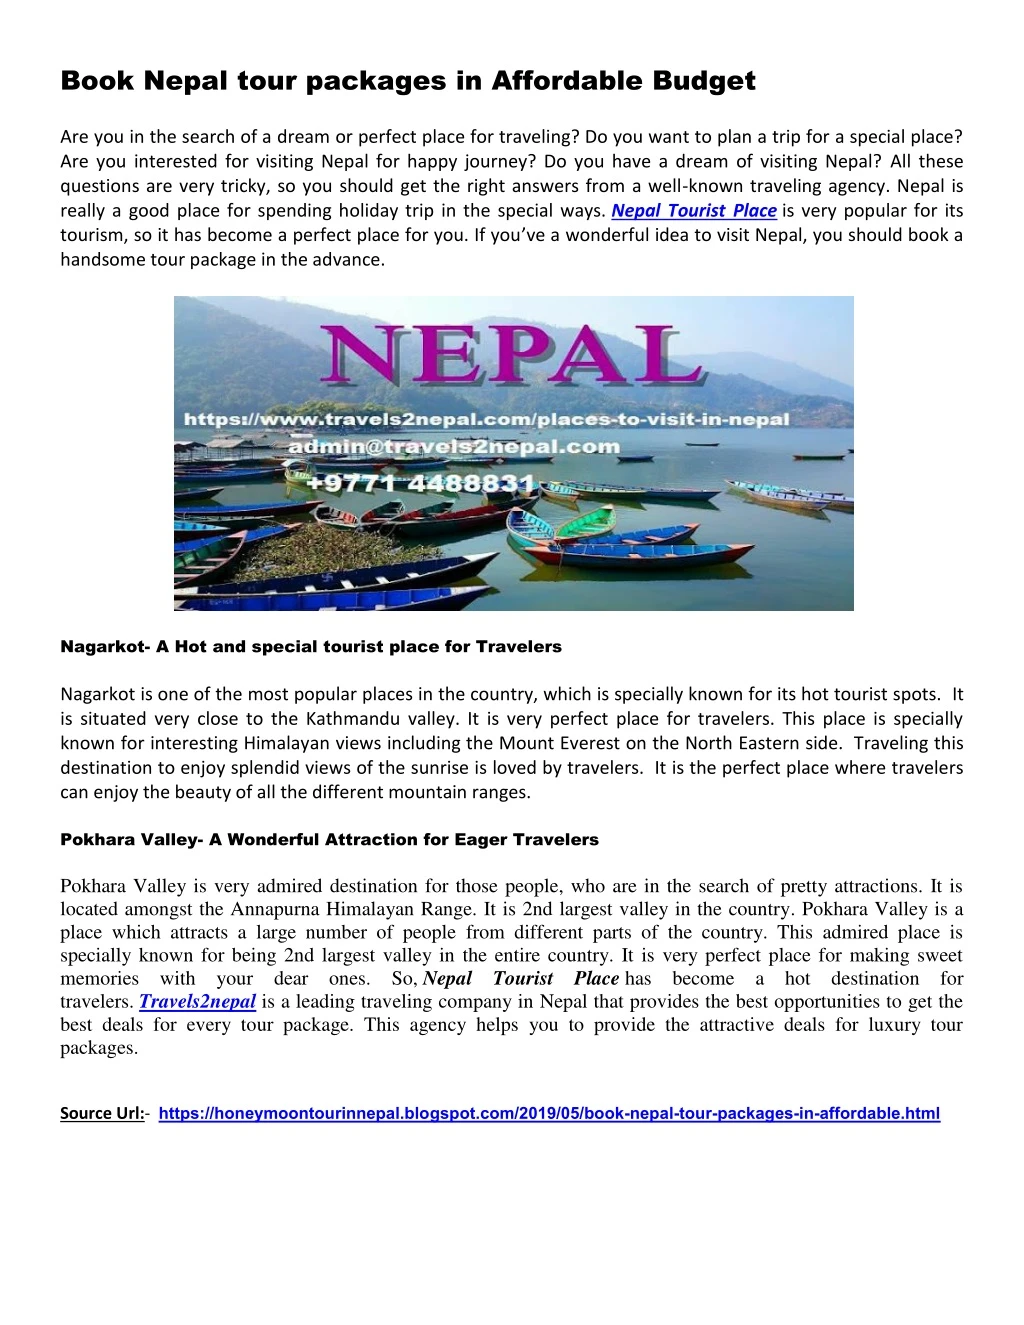 book nepal tour packages in affordable budget